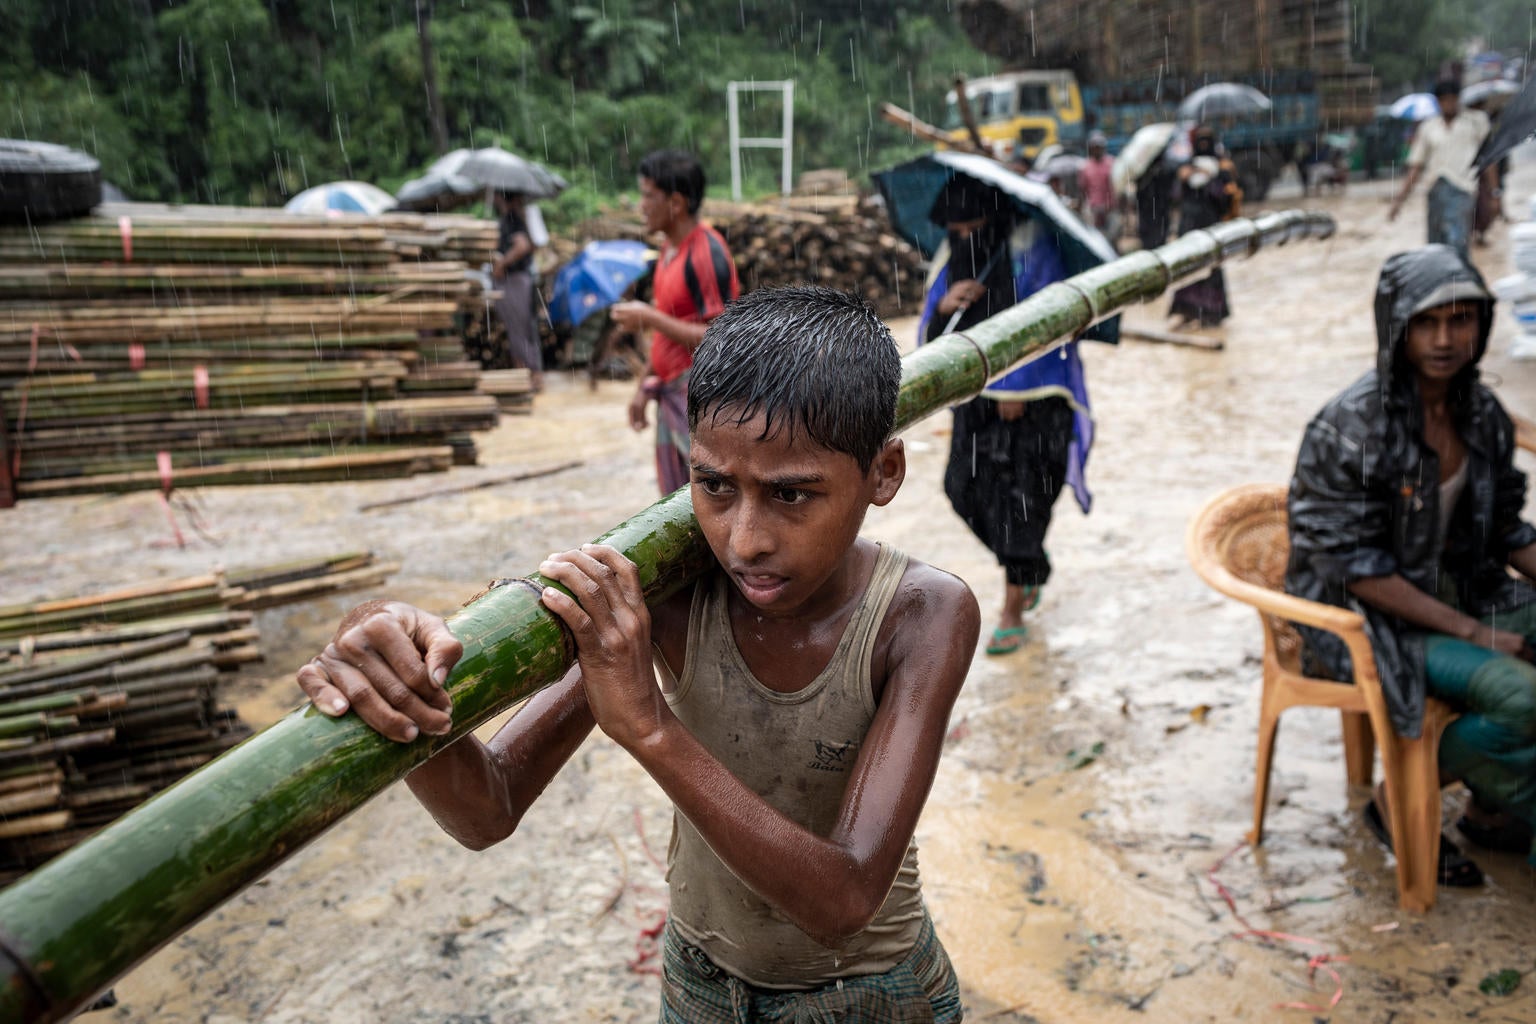 Cox's Bazar in Bangladesh, a boy carries a bamboo pole, used for building basic shelters, were unloaded near the settlement.